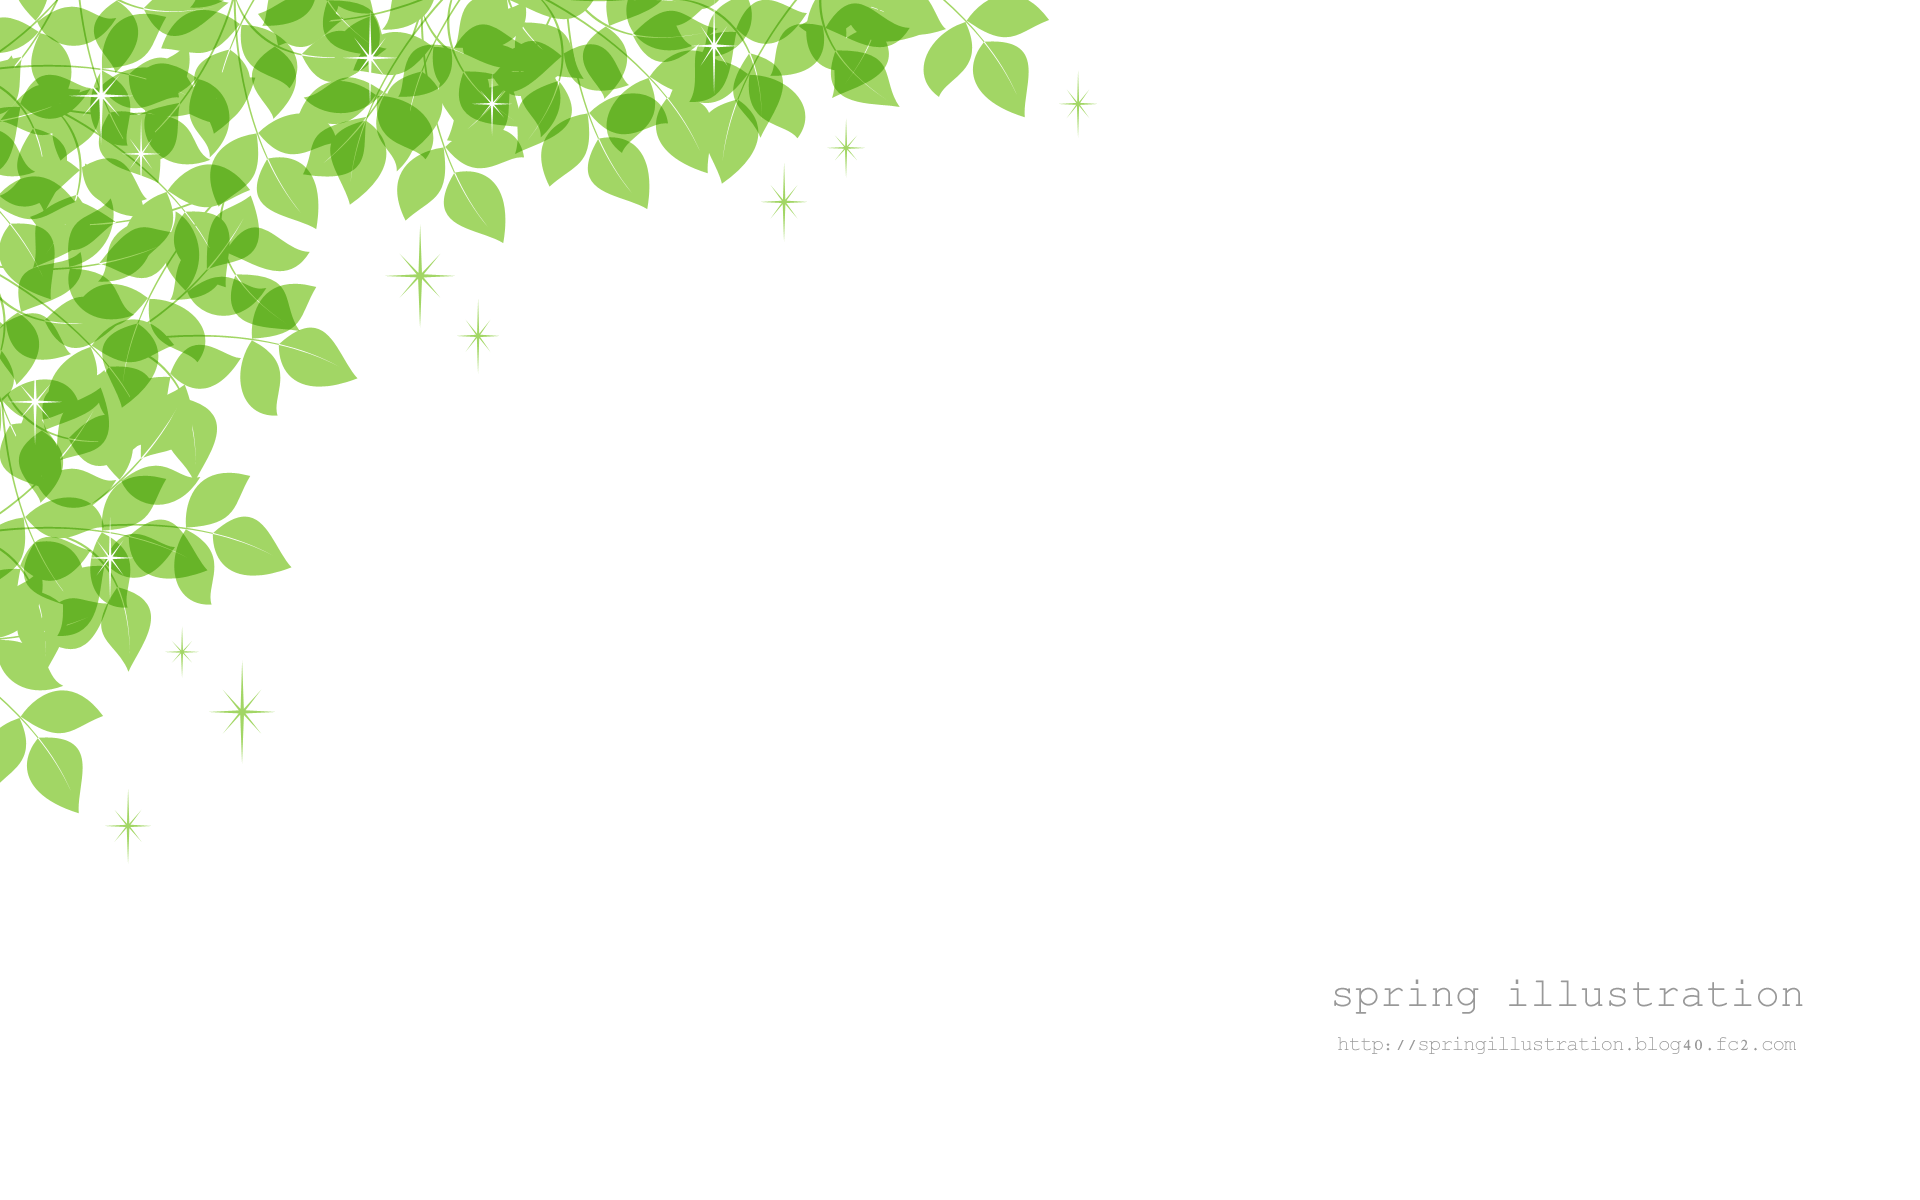 Green Leaves 植物のイラスト壁紙 花と植物のイラストpc壁紙